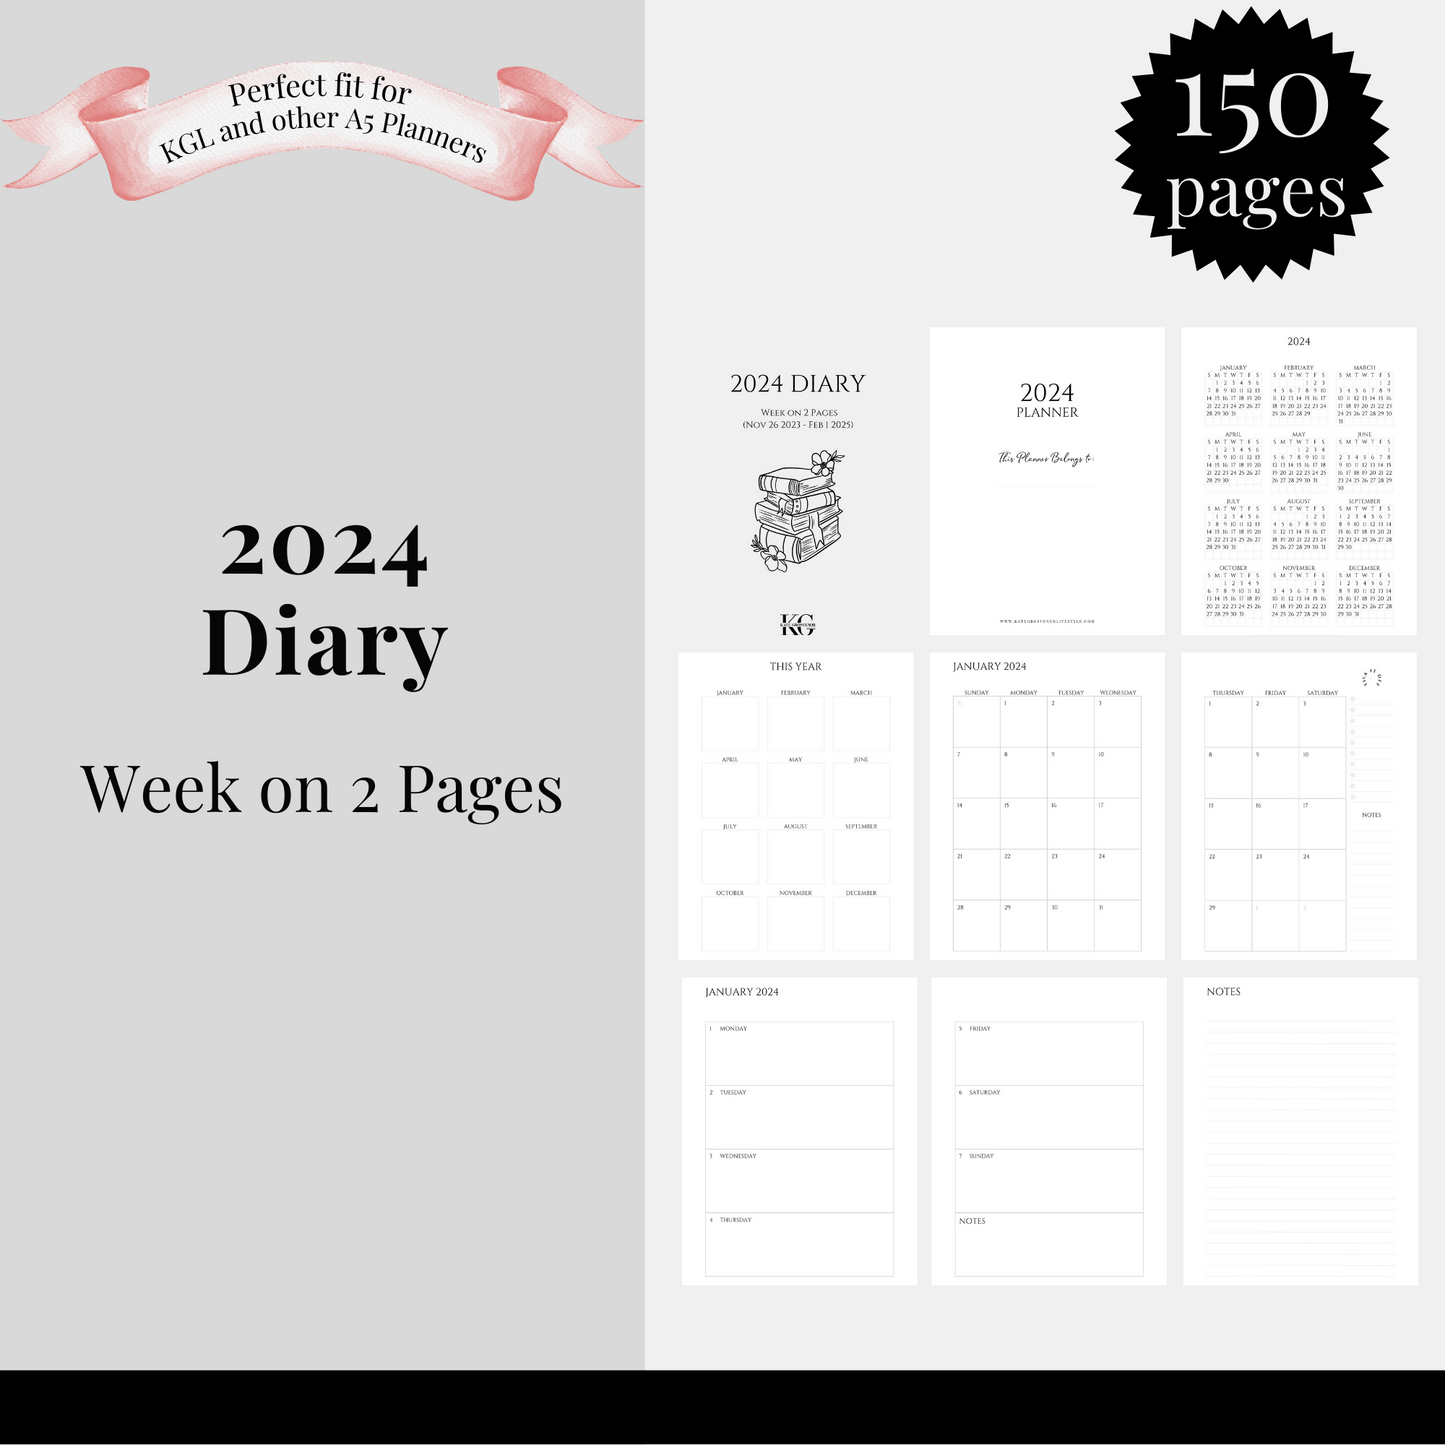 2024 Diary Week on 2 Pages